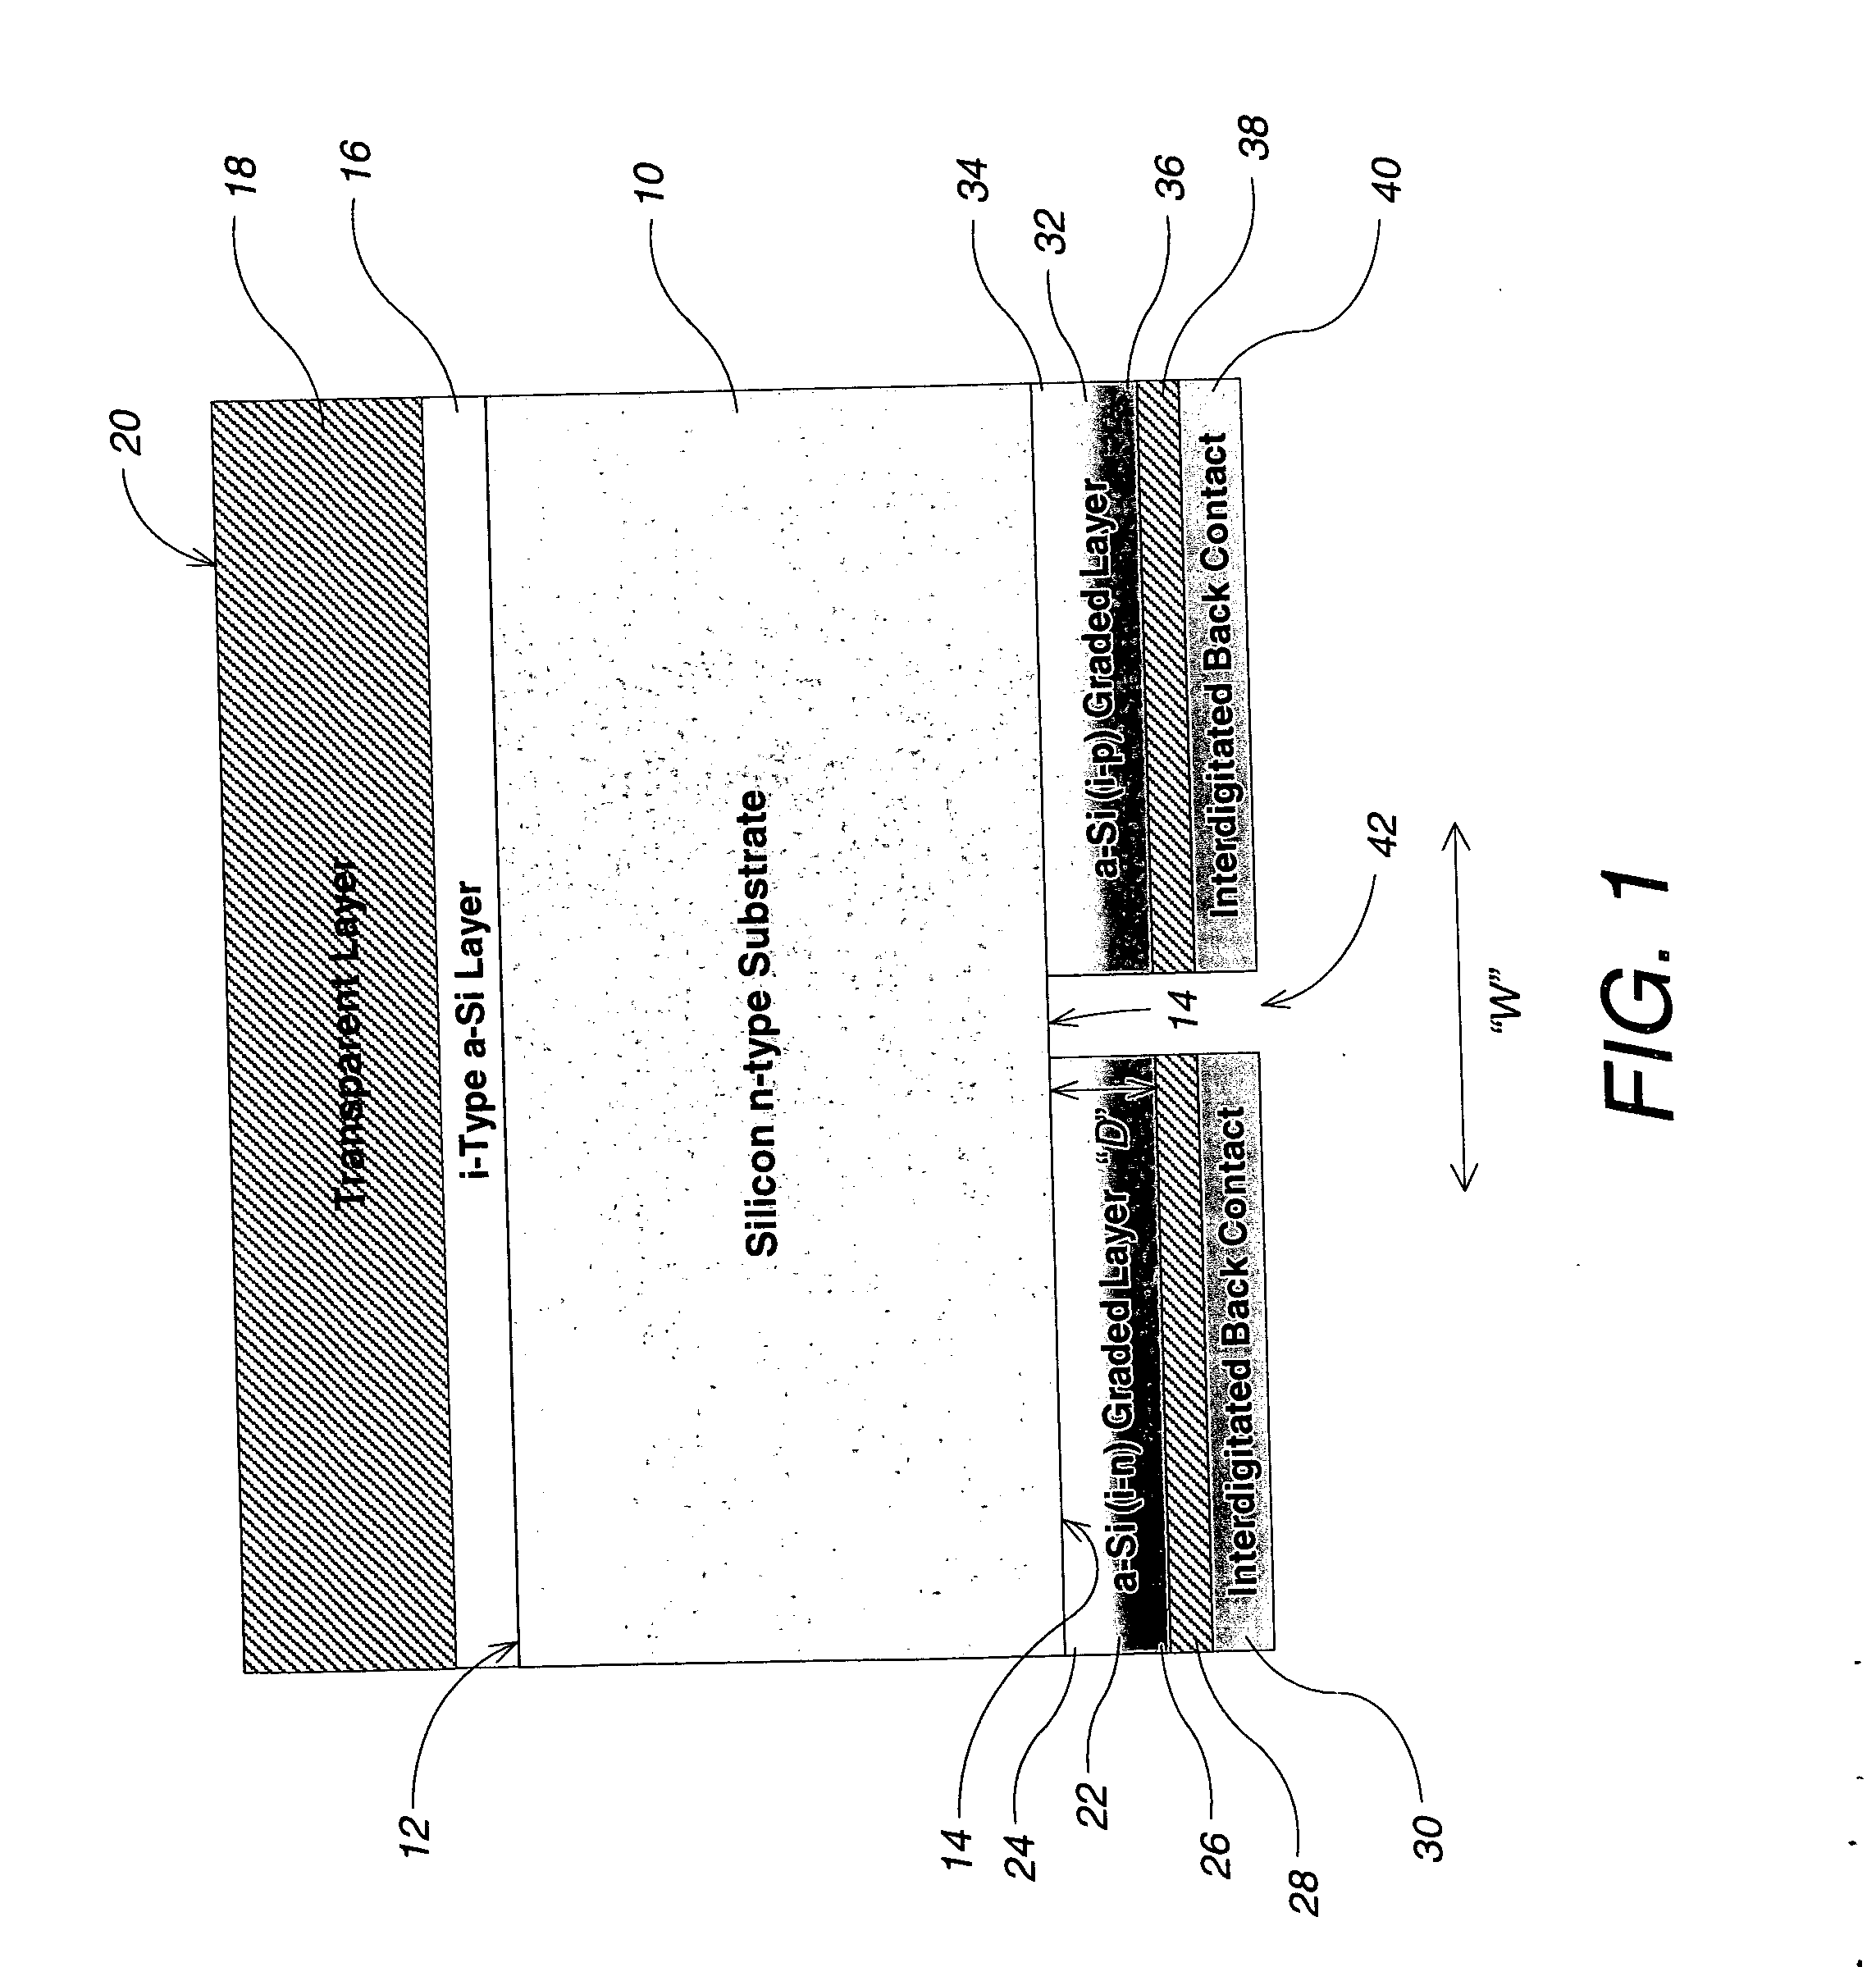 Photovoltaic device which includes all-back-contact configuration; and related processes